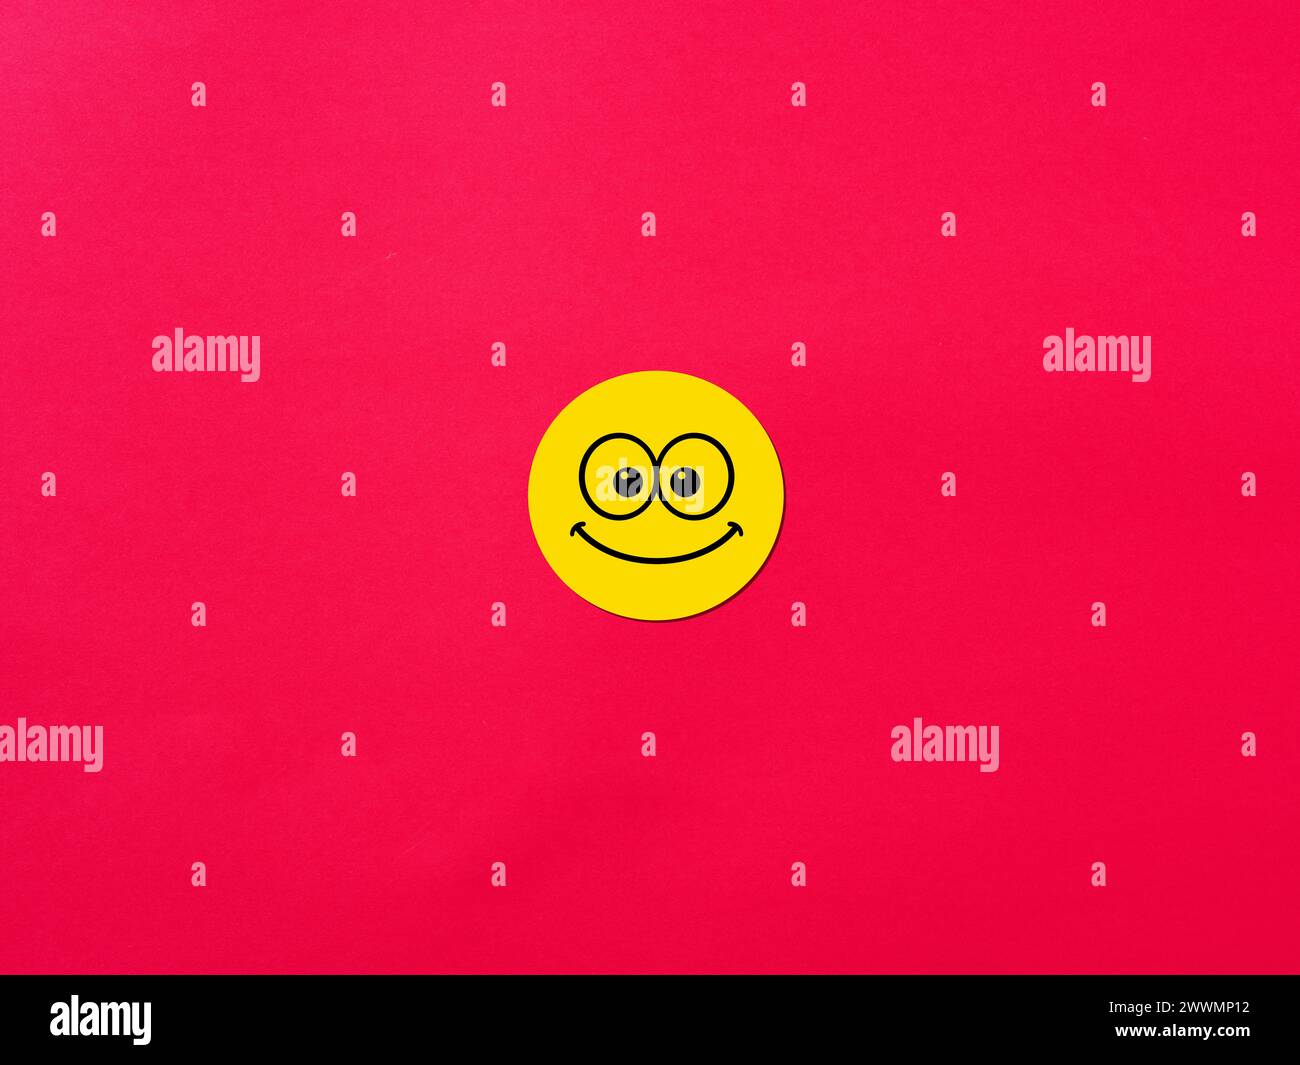 Smiling happy face emoticon on red background. Happiness, joy and positivity concepts. Stock Photo